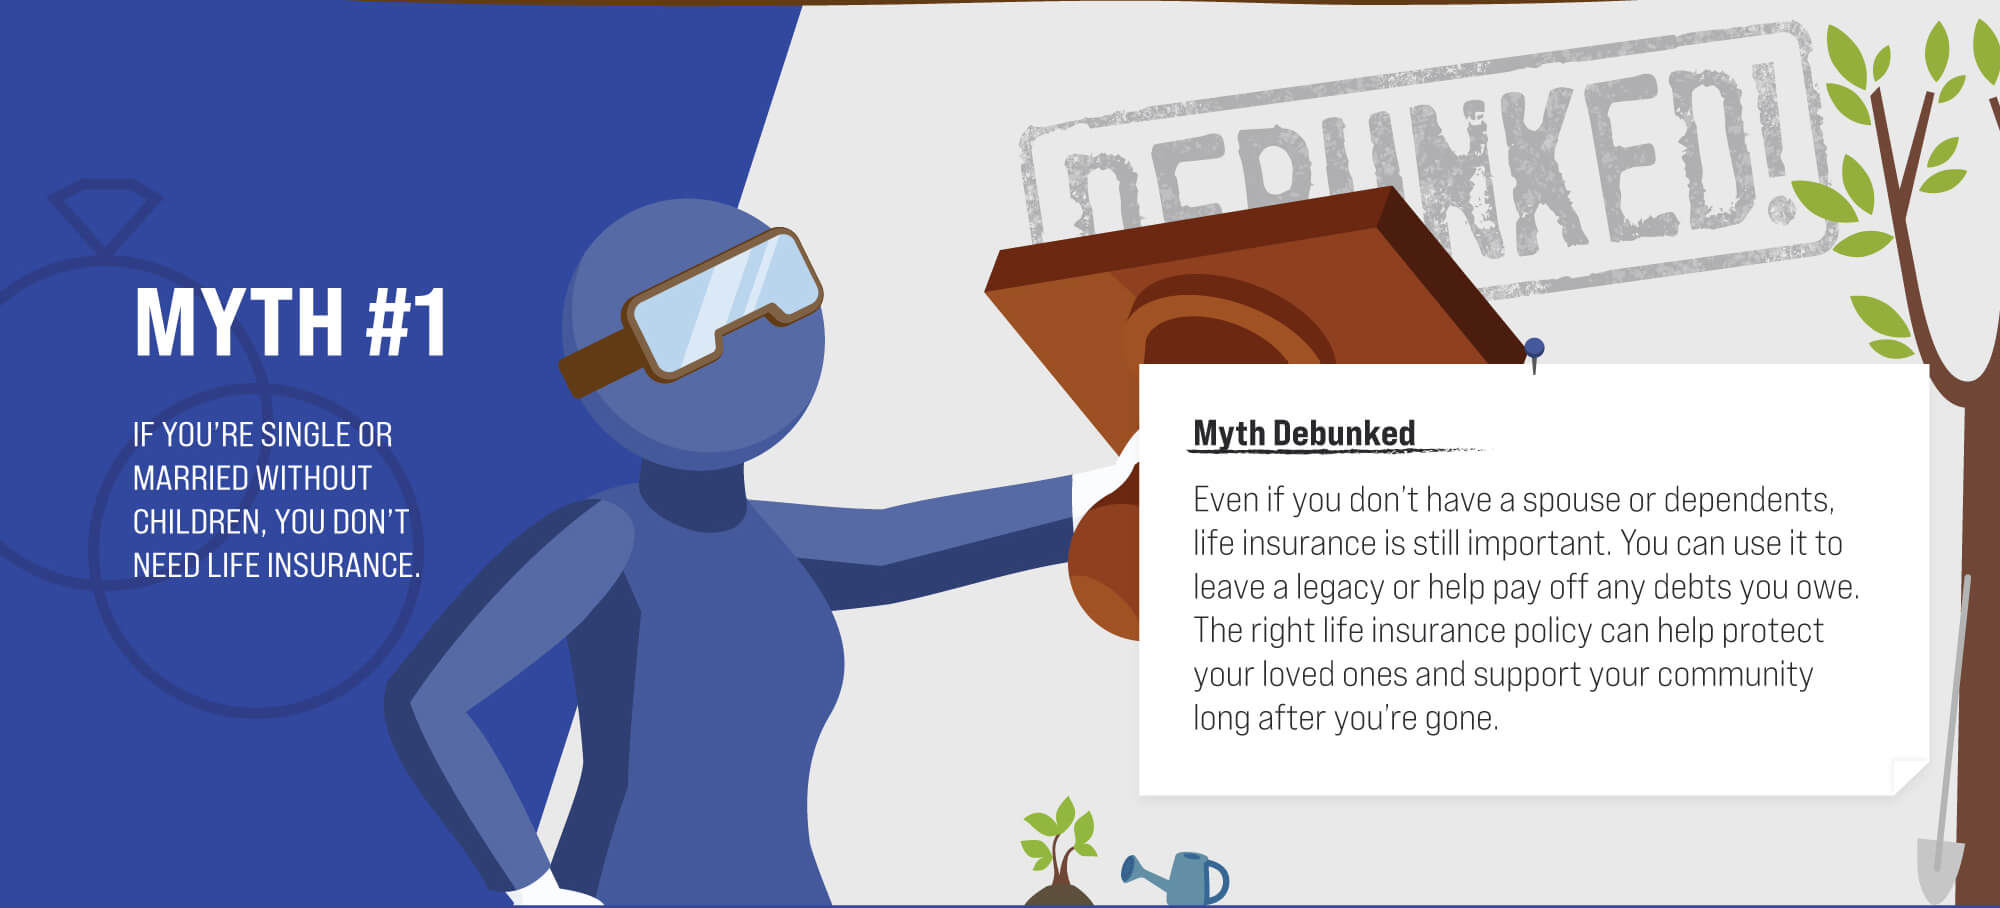 Myth #1: If you’re single or married without children, you don’t need life insurance. Myth Debunked. Even if you don’t have a spouse or dependents, life insurance is still important. You can use it to leave a legacy or to help pay off any debts you owe. The right life insurance policy can help you protect your loved ones and support your community long after you’re gone. (1)